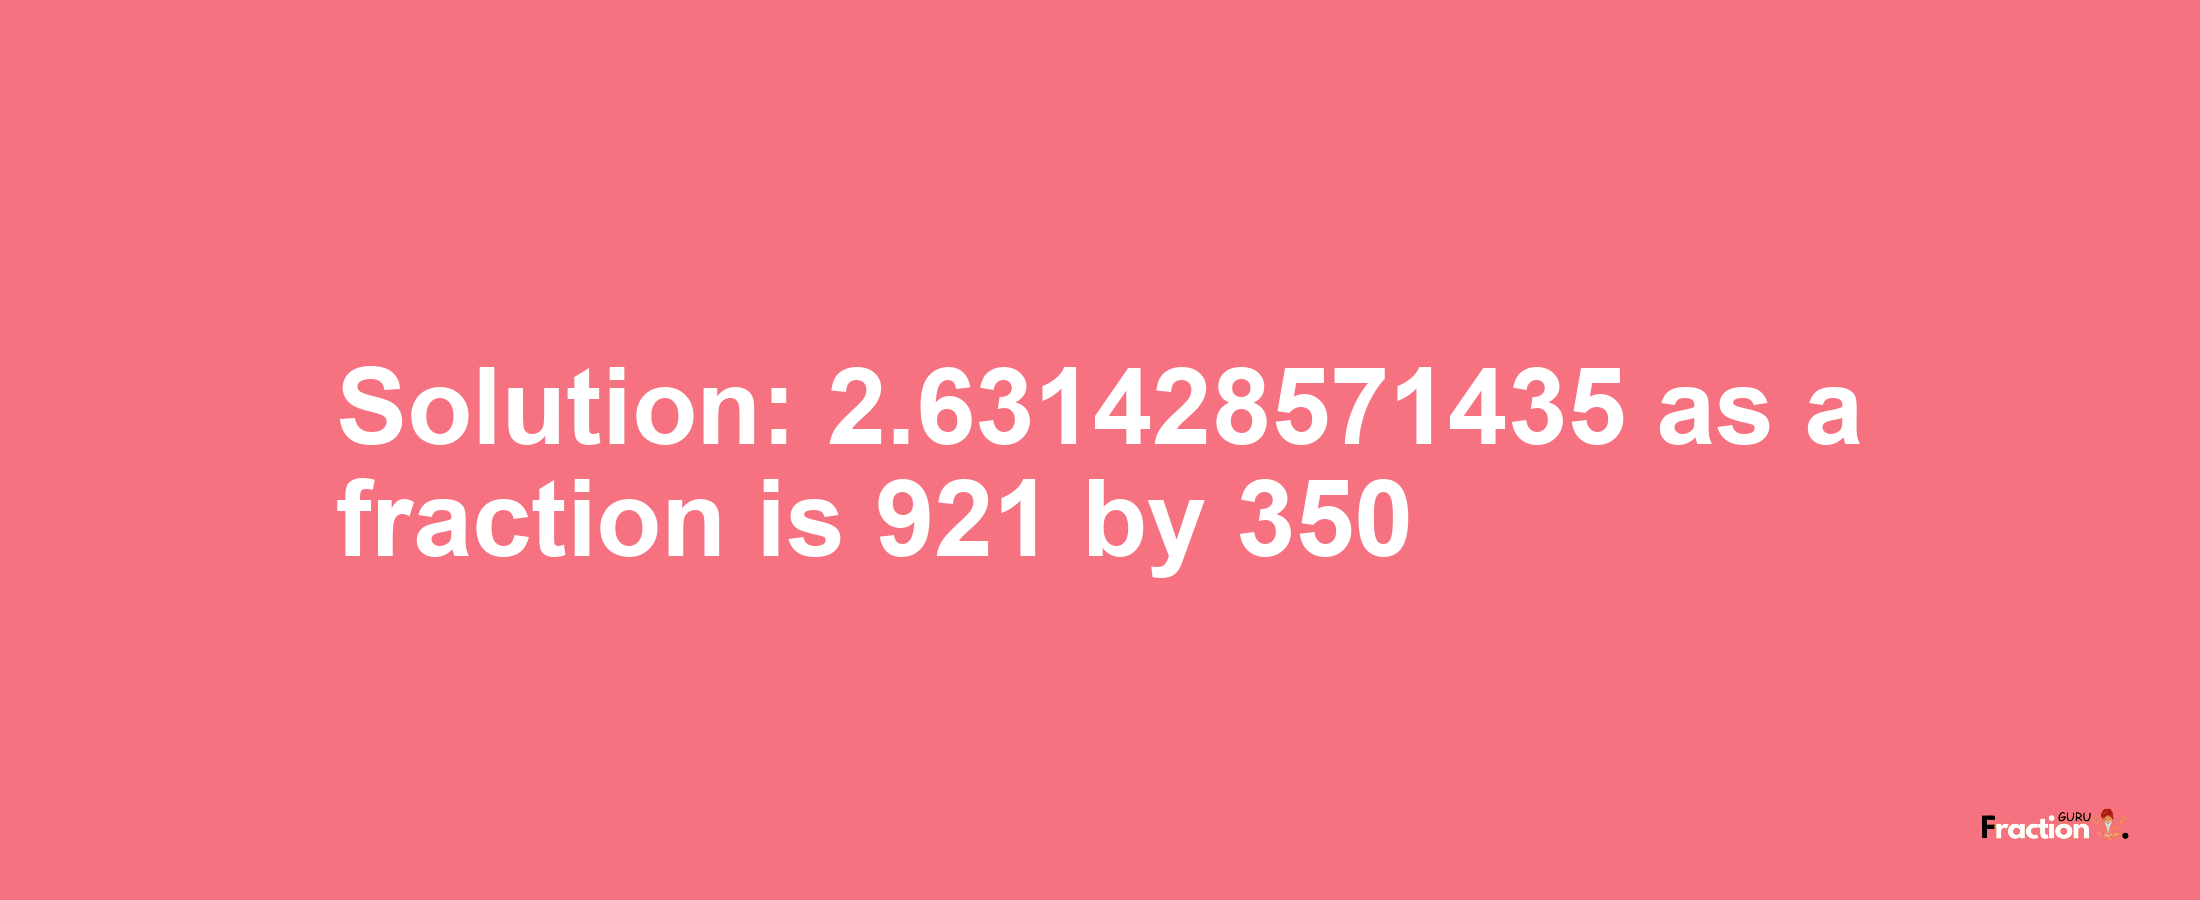 Solution:2.631428571435 as a fraction is 921/350